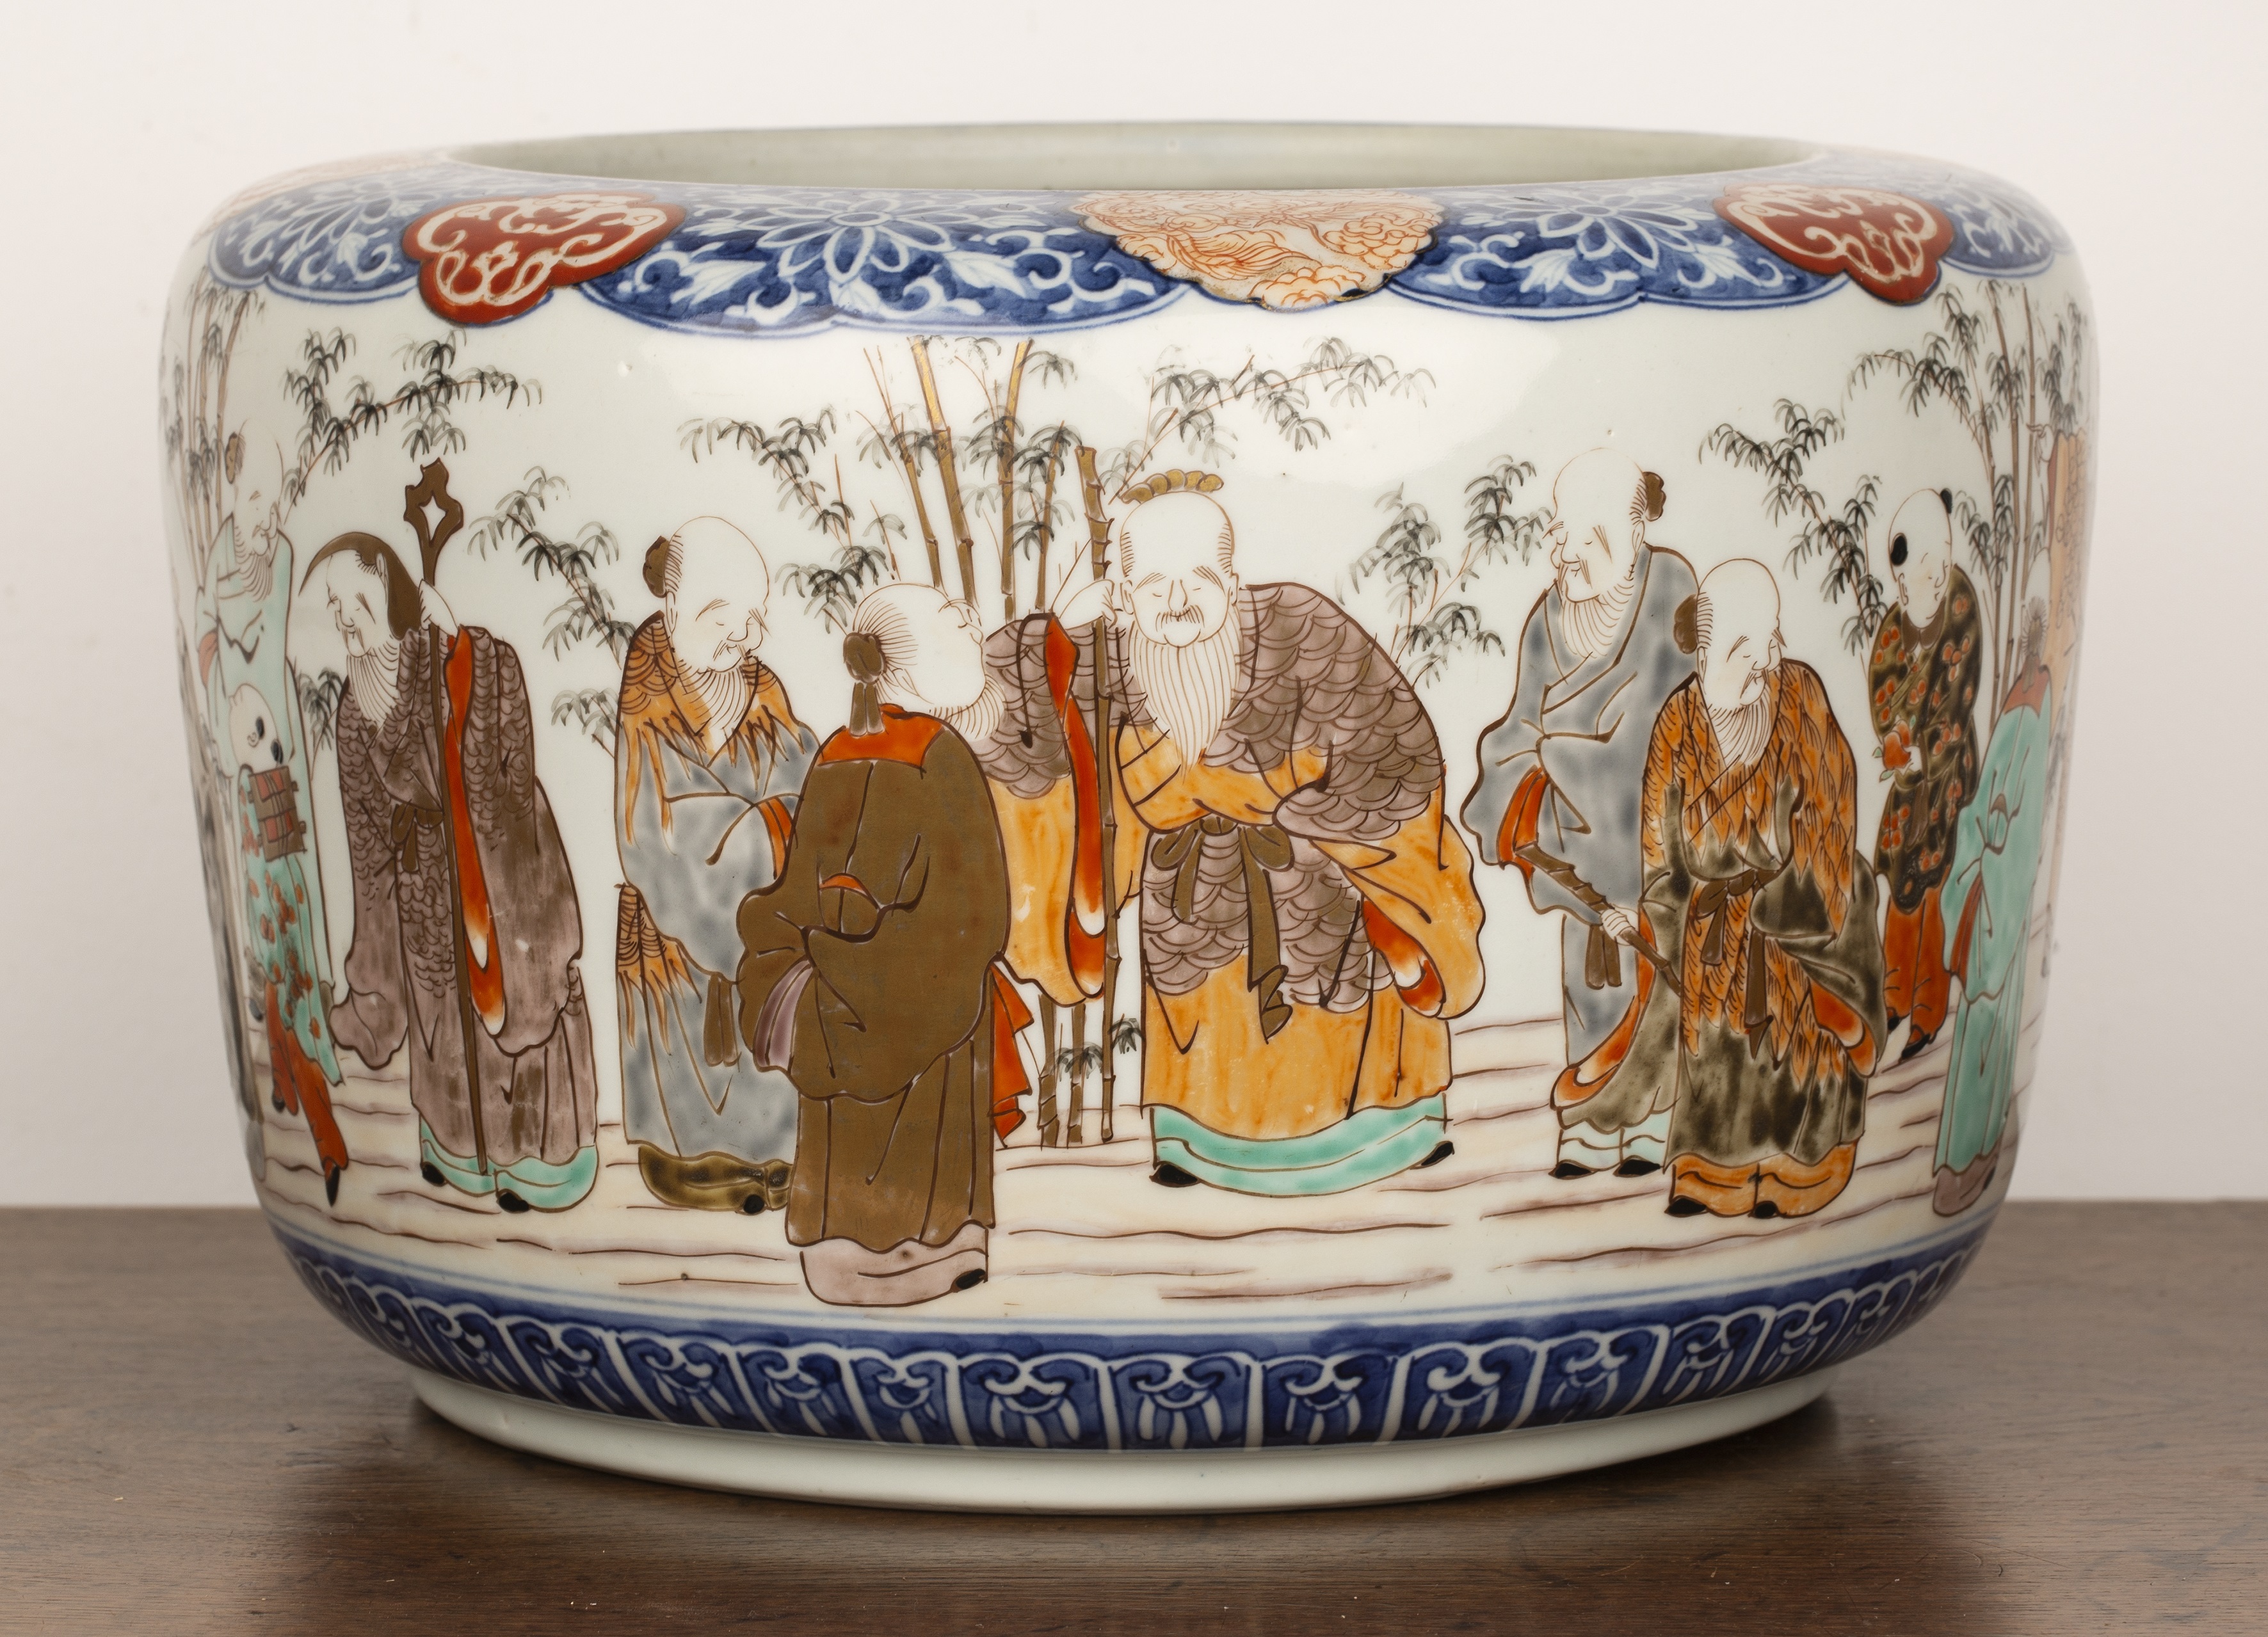 Arita porcelain jardiniere Japanese, mid 19th Century painted in an Imari palette with a band of - Image 3 of 4